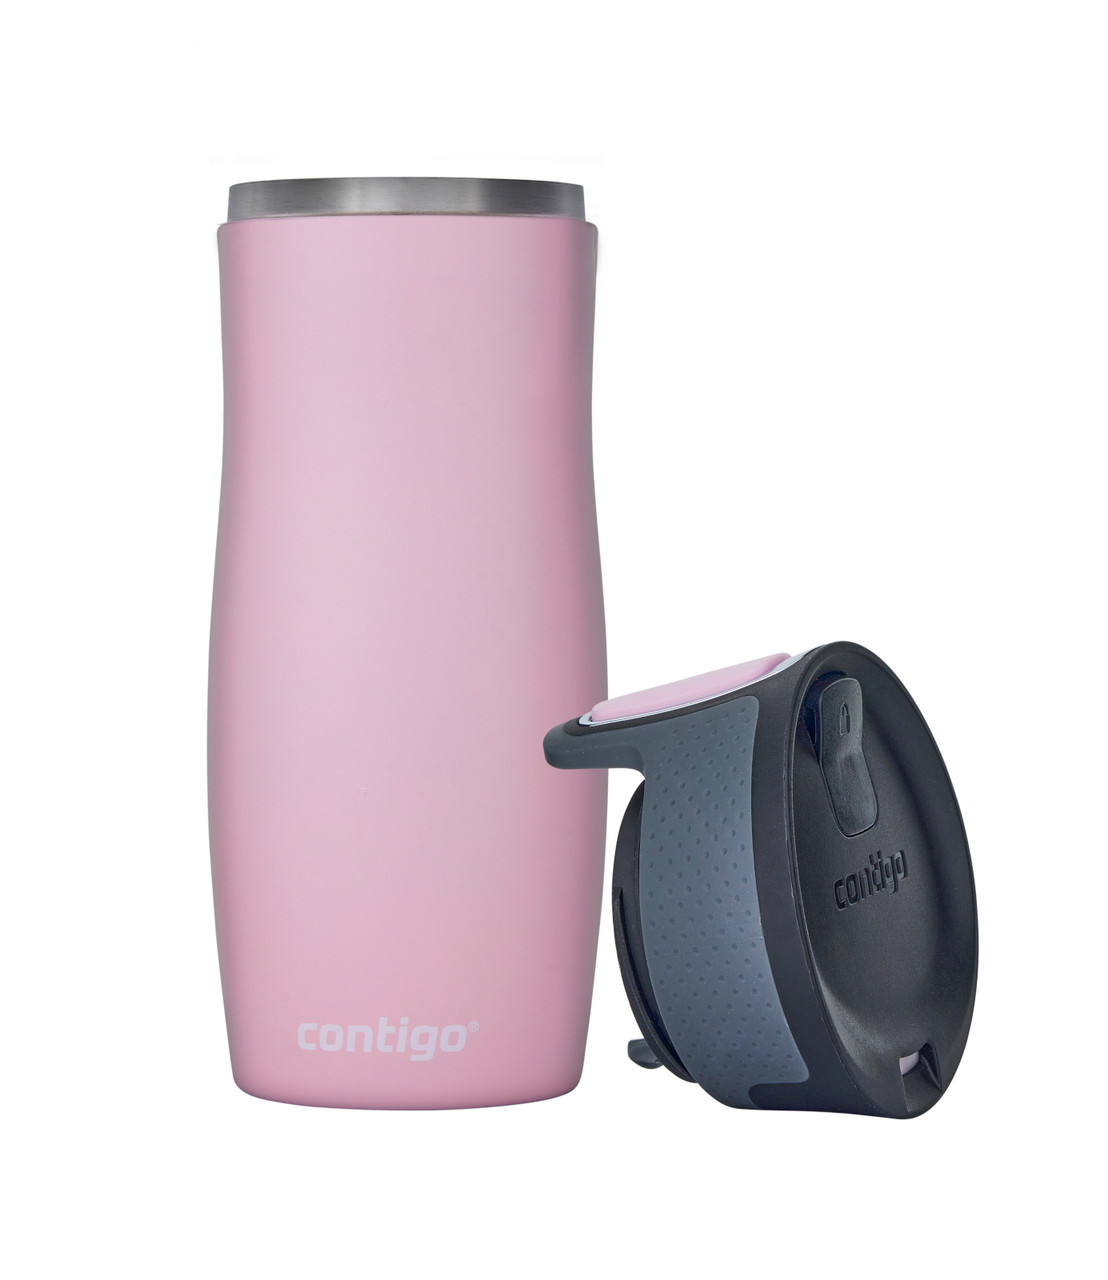 Contigo's popular AUTOSEAL West Loop Travel Mugs are starting from $9 in  today's Gold Box